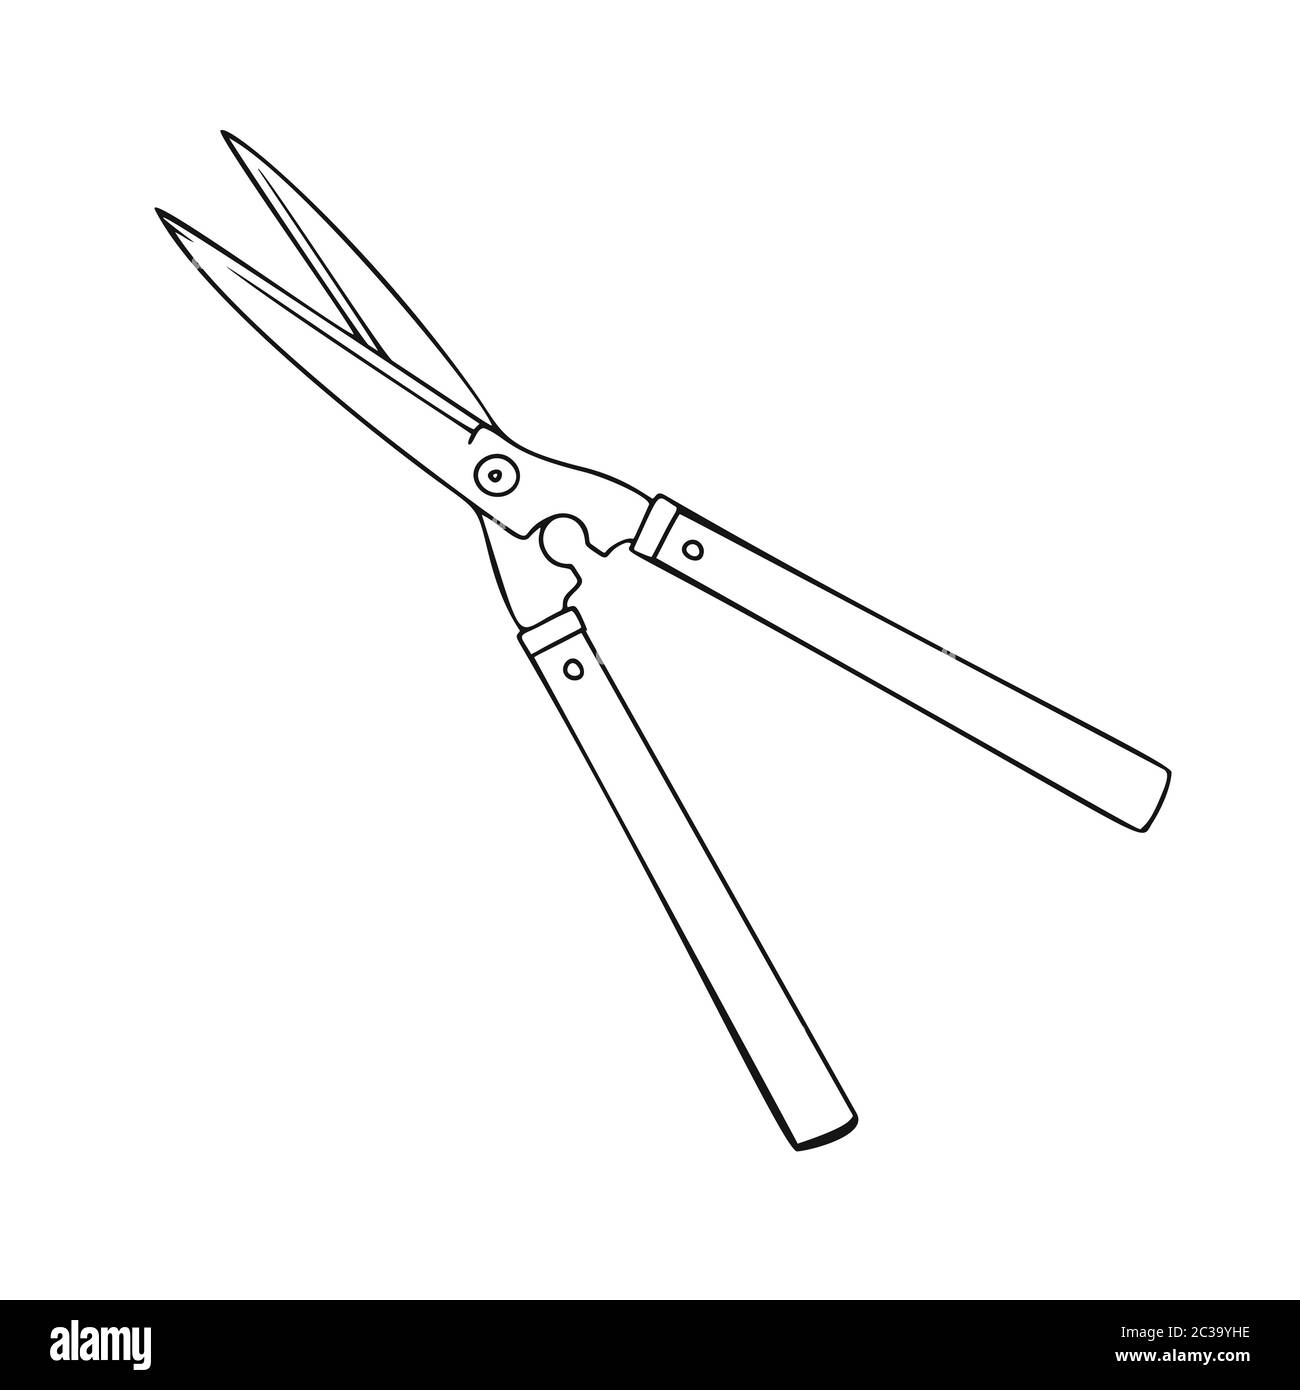 Garden secateurs isolated on a white background. Vector illustration in sketch style. Stock Vector